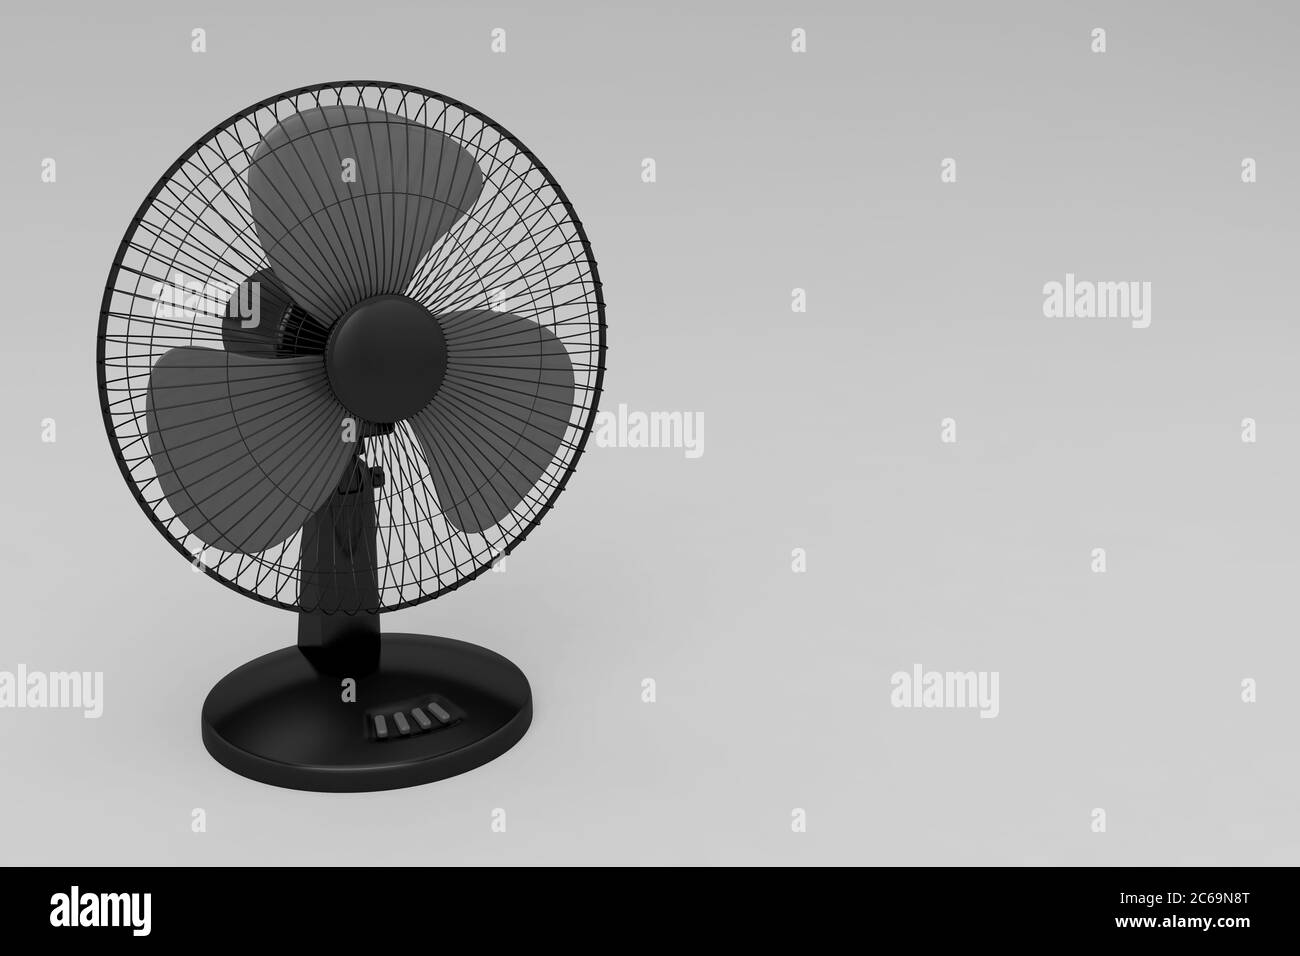 electric fan blown cold wind 3D illustration Stock Photo